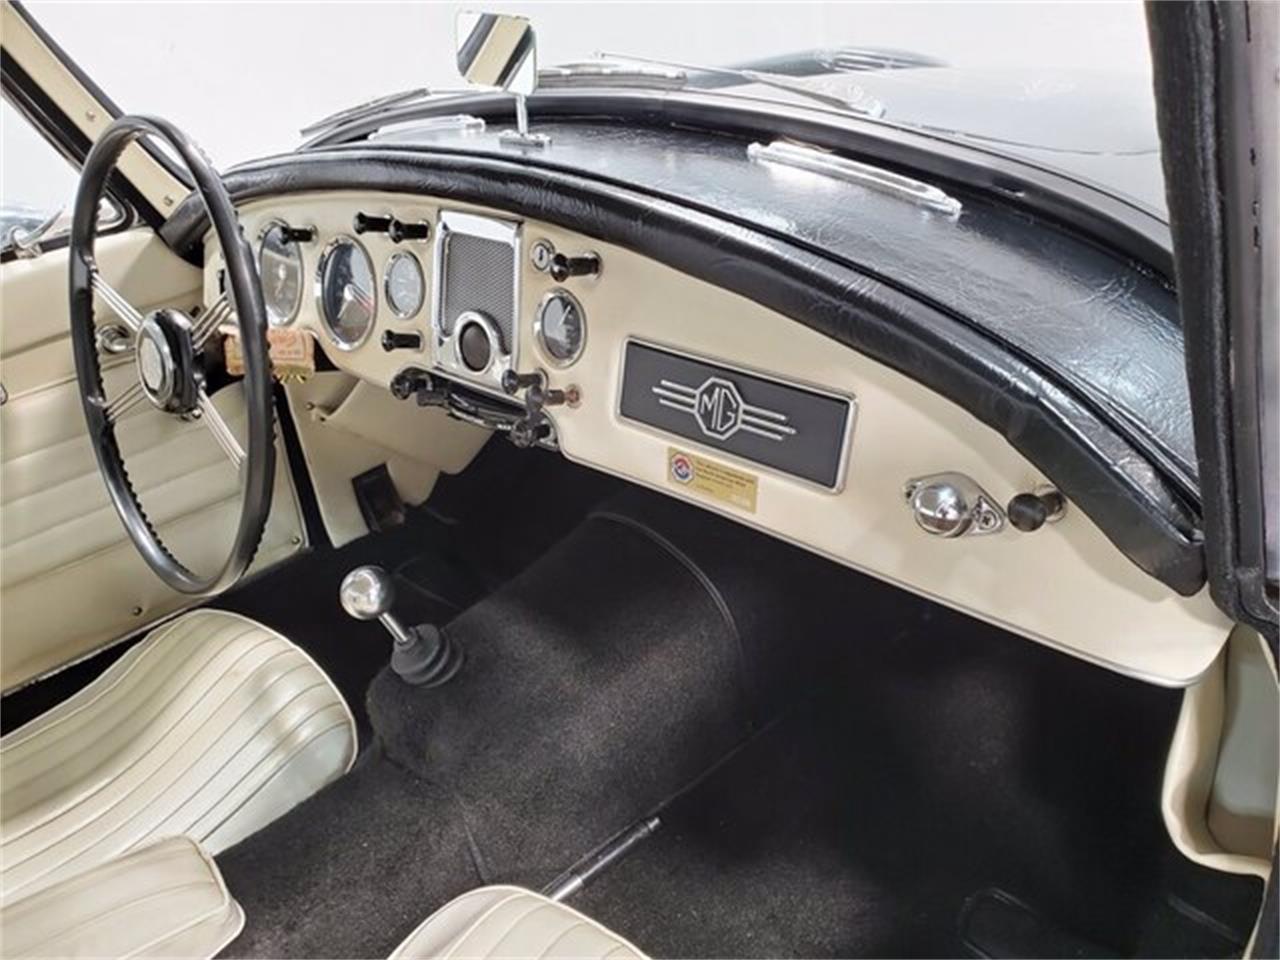 1957 MG Antique for sale in Sioux Falls, SD – photo 76